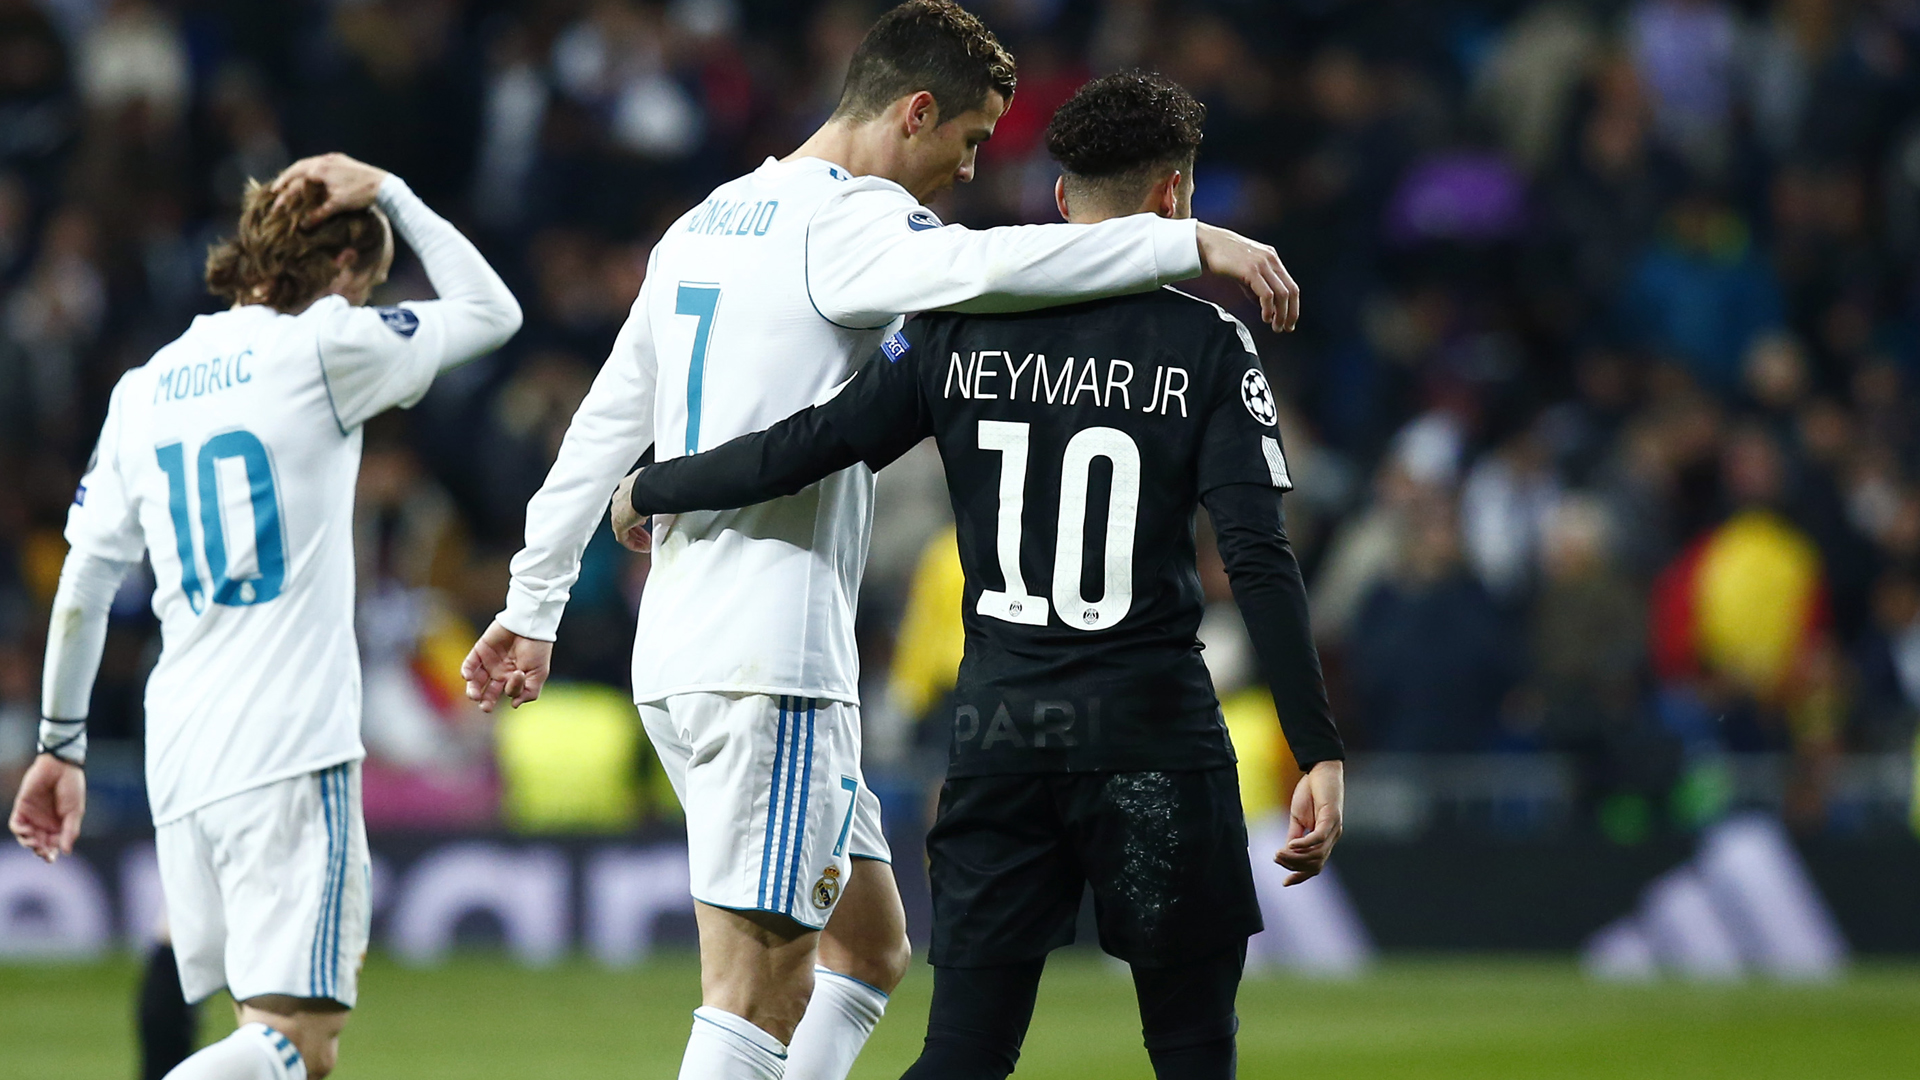 Neymar transfer news: Ronaldo says Cristiano and Neymar would be good together at ...